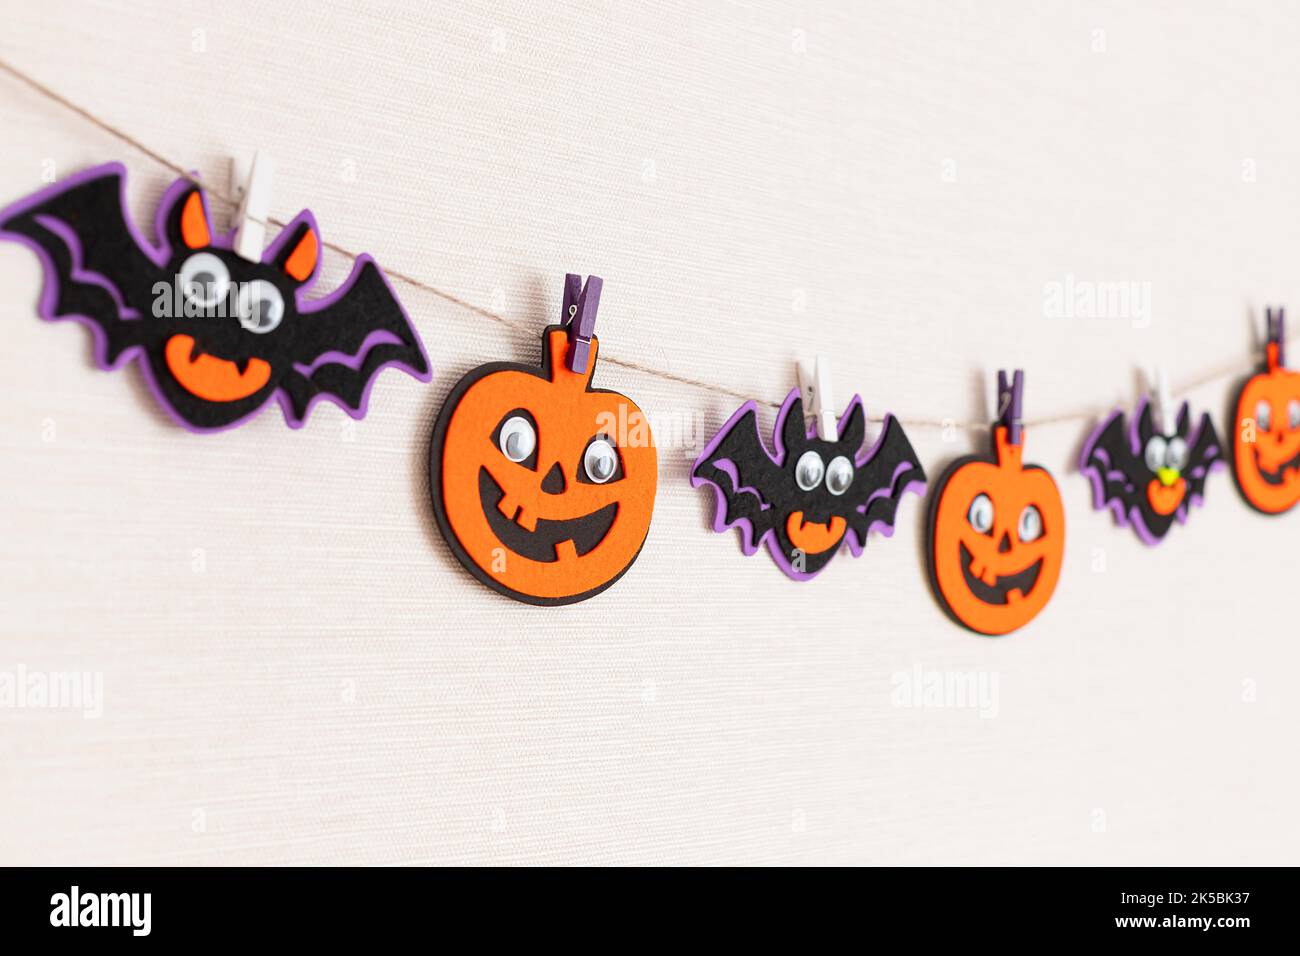 festive garland or banner with pumpkins and bats over white background Stock Photo